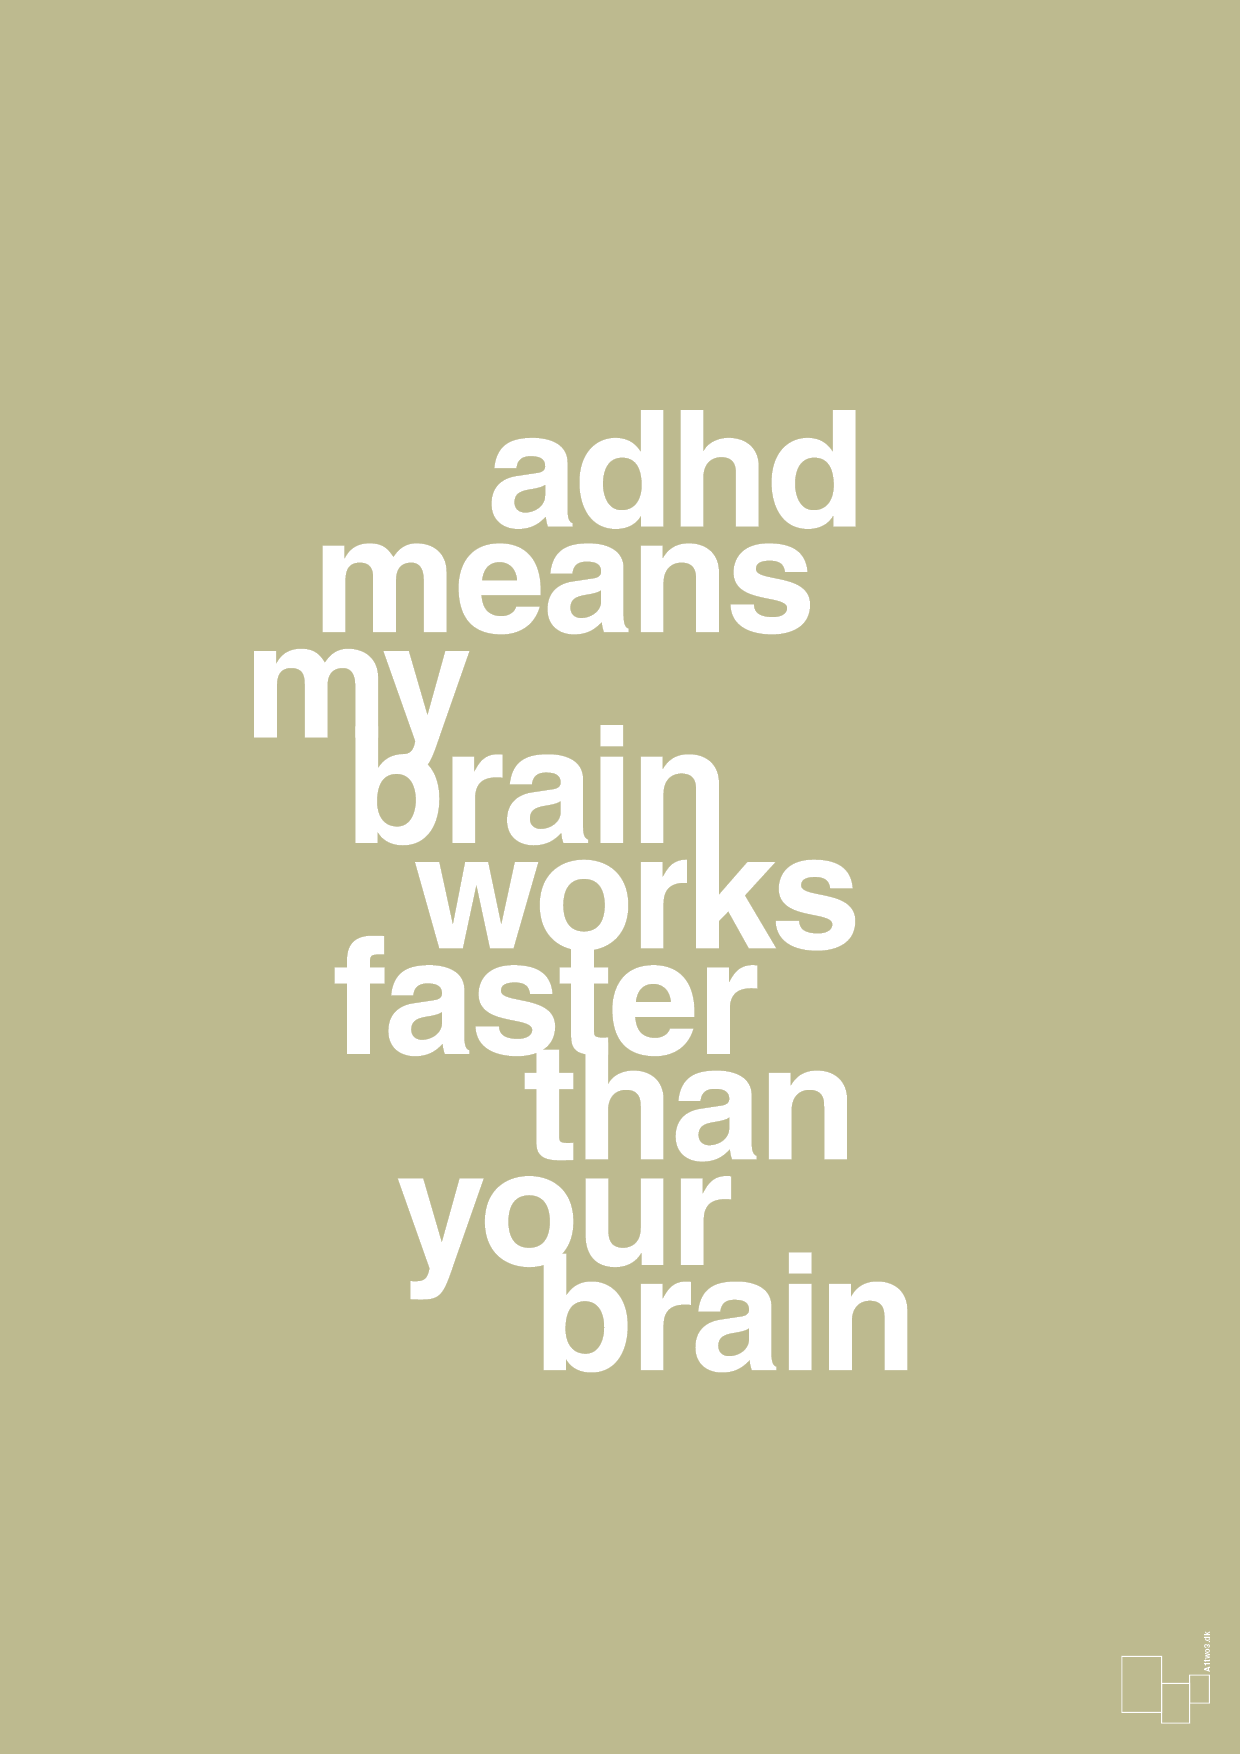 adhd means my brain works faster than your brain - Plakat med Samfund i Back to Nature